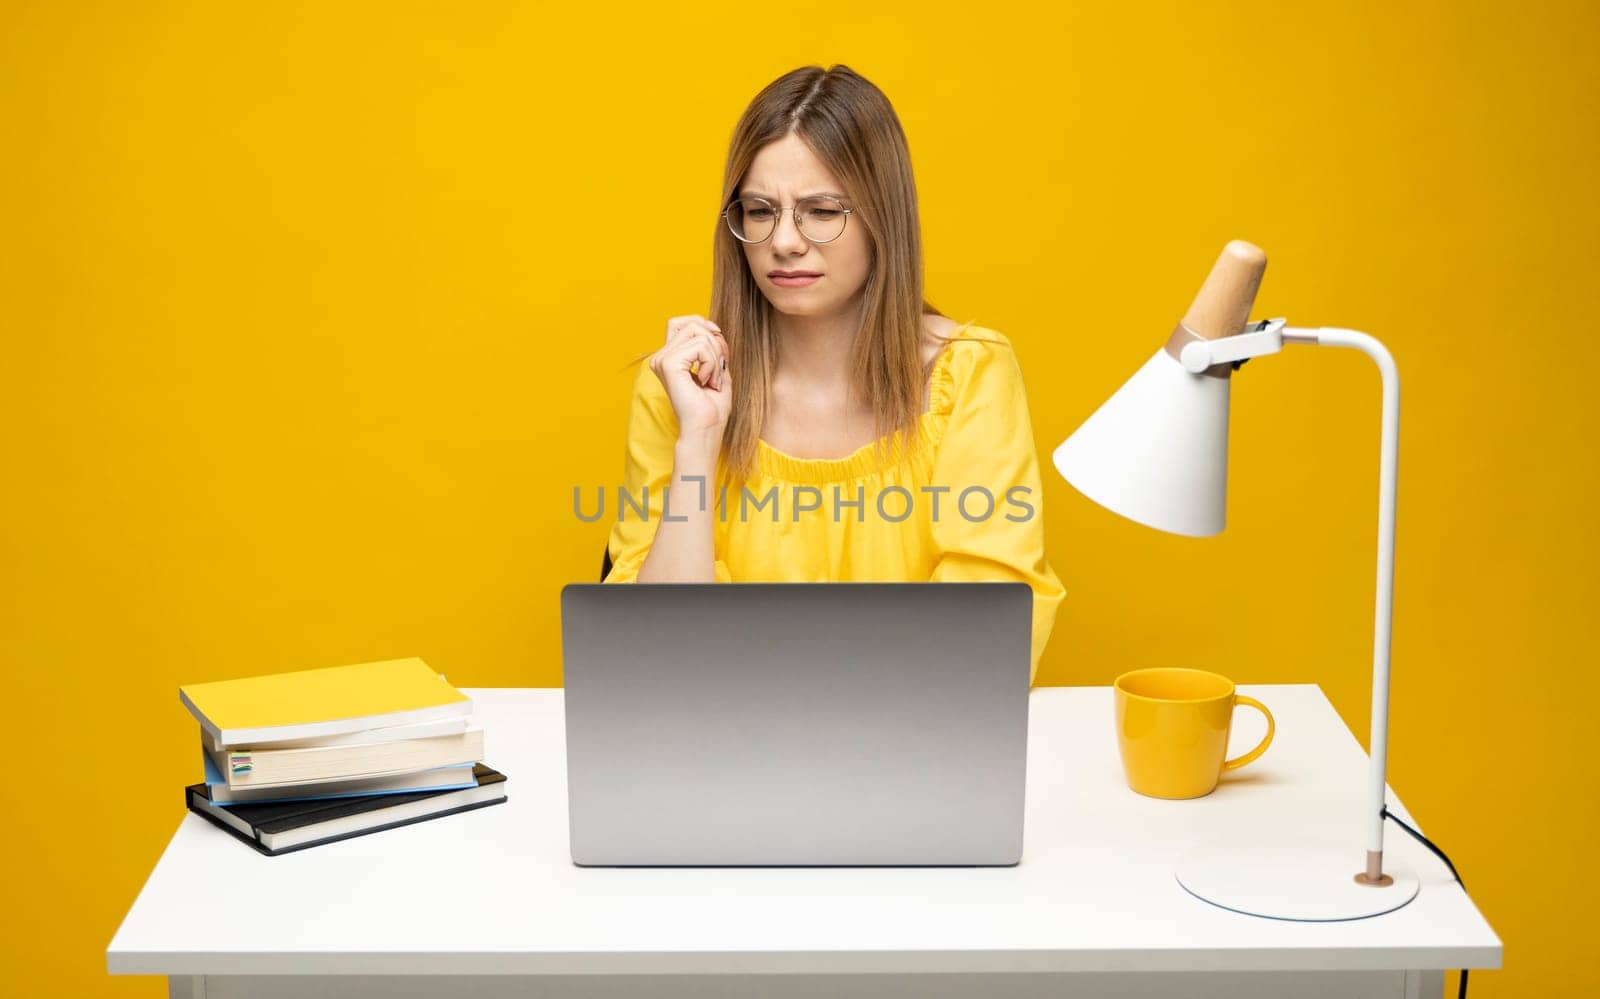 Frustrated, sad, stressed or depressed woman feeling tired while working with a laptop on a black background